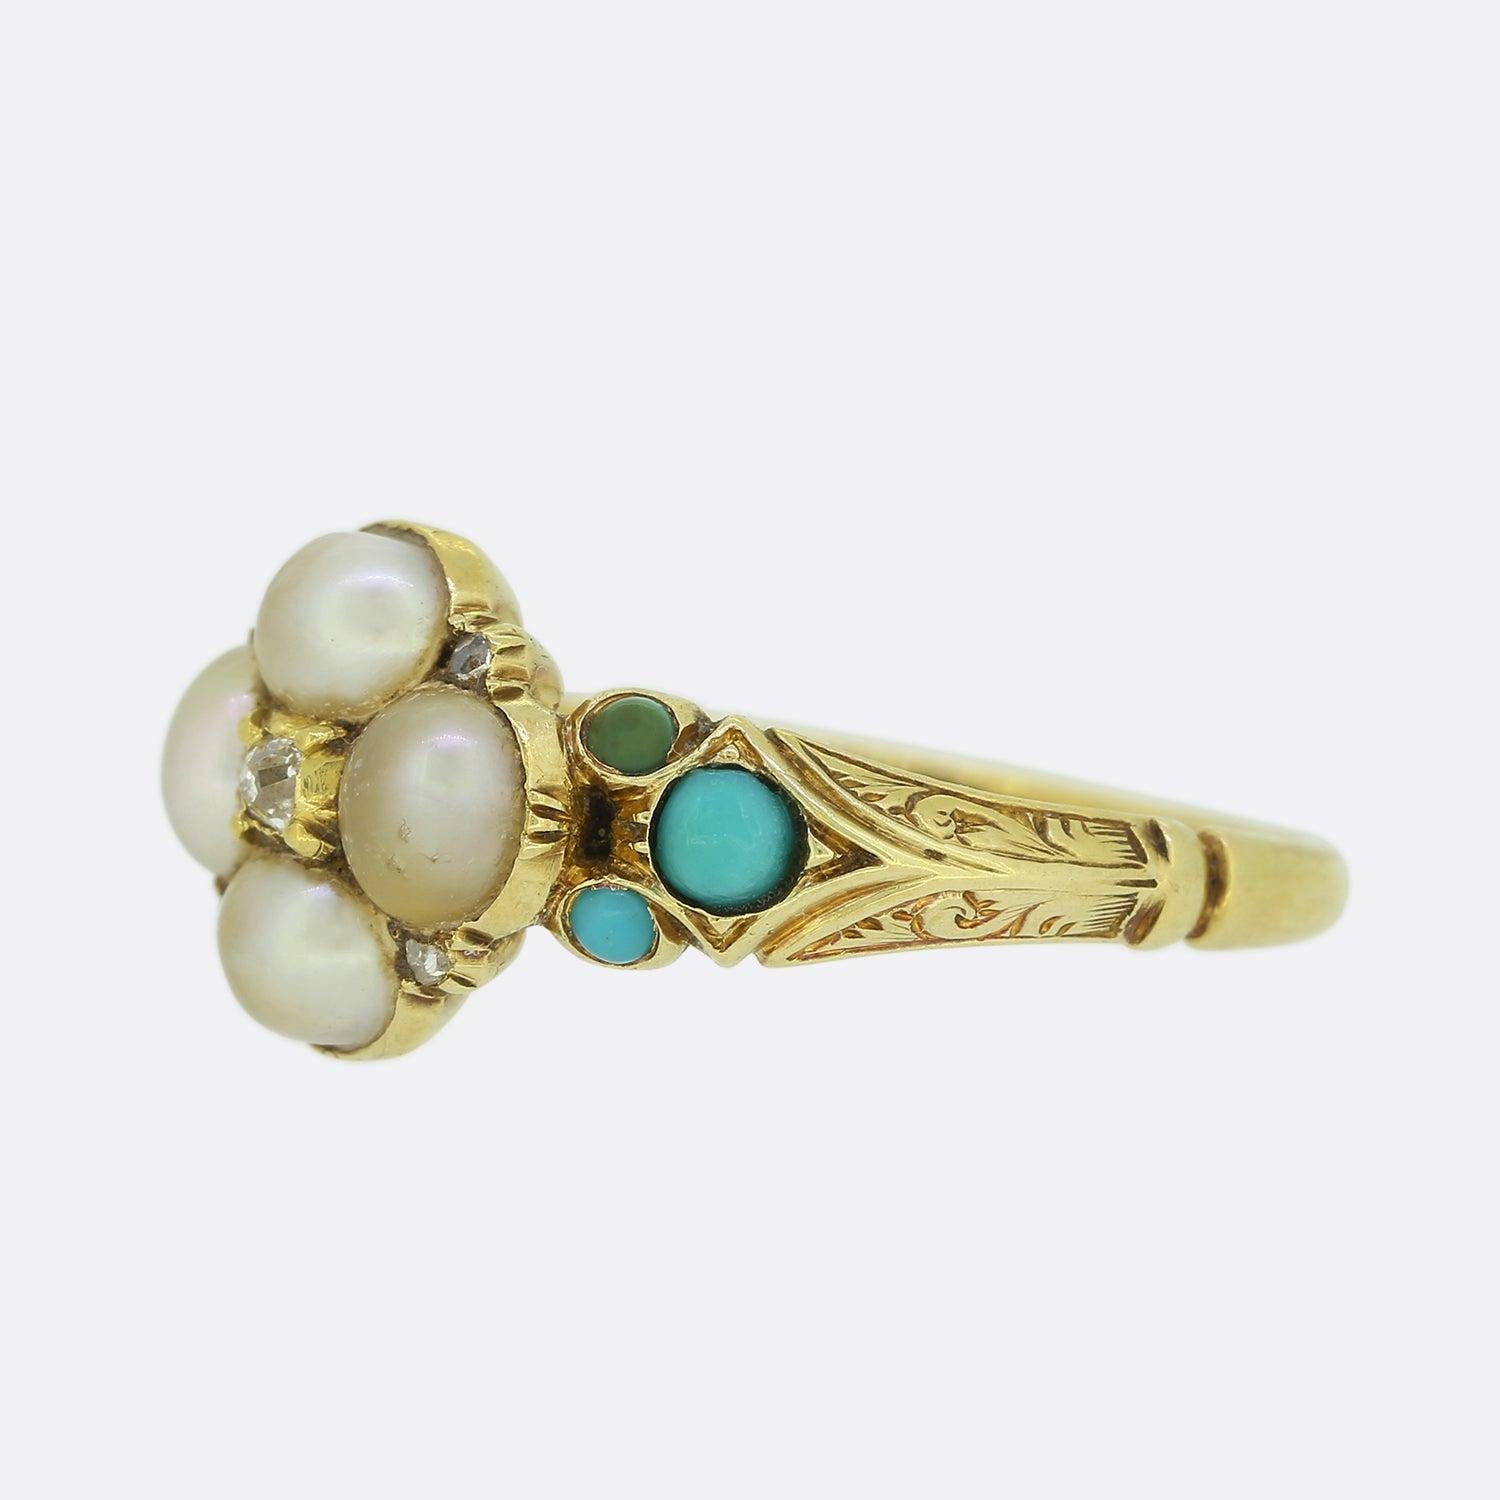 This is a Victorian turquoise, diamond and pearl cluster ring from the Victorian era. The ring features a central old cut diamond surrounded by four natural pearls and four rose cut diamonds. The ring also features three turquoise stones set on each